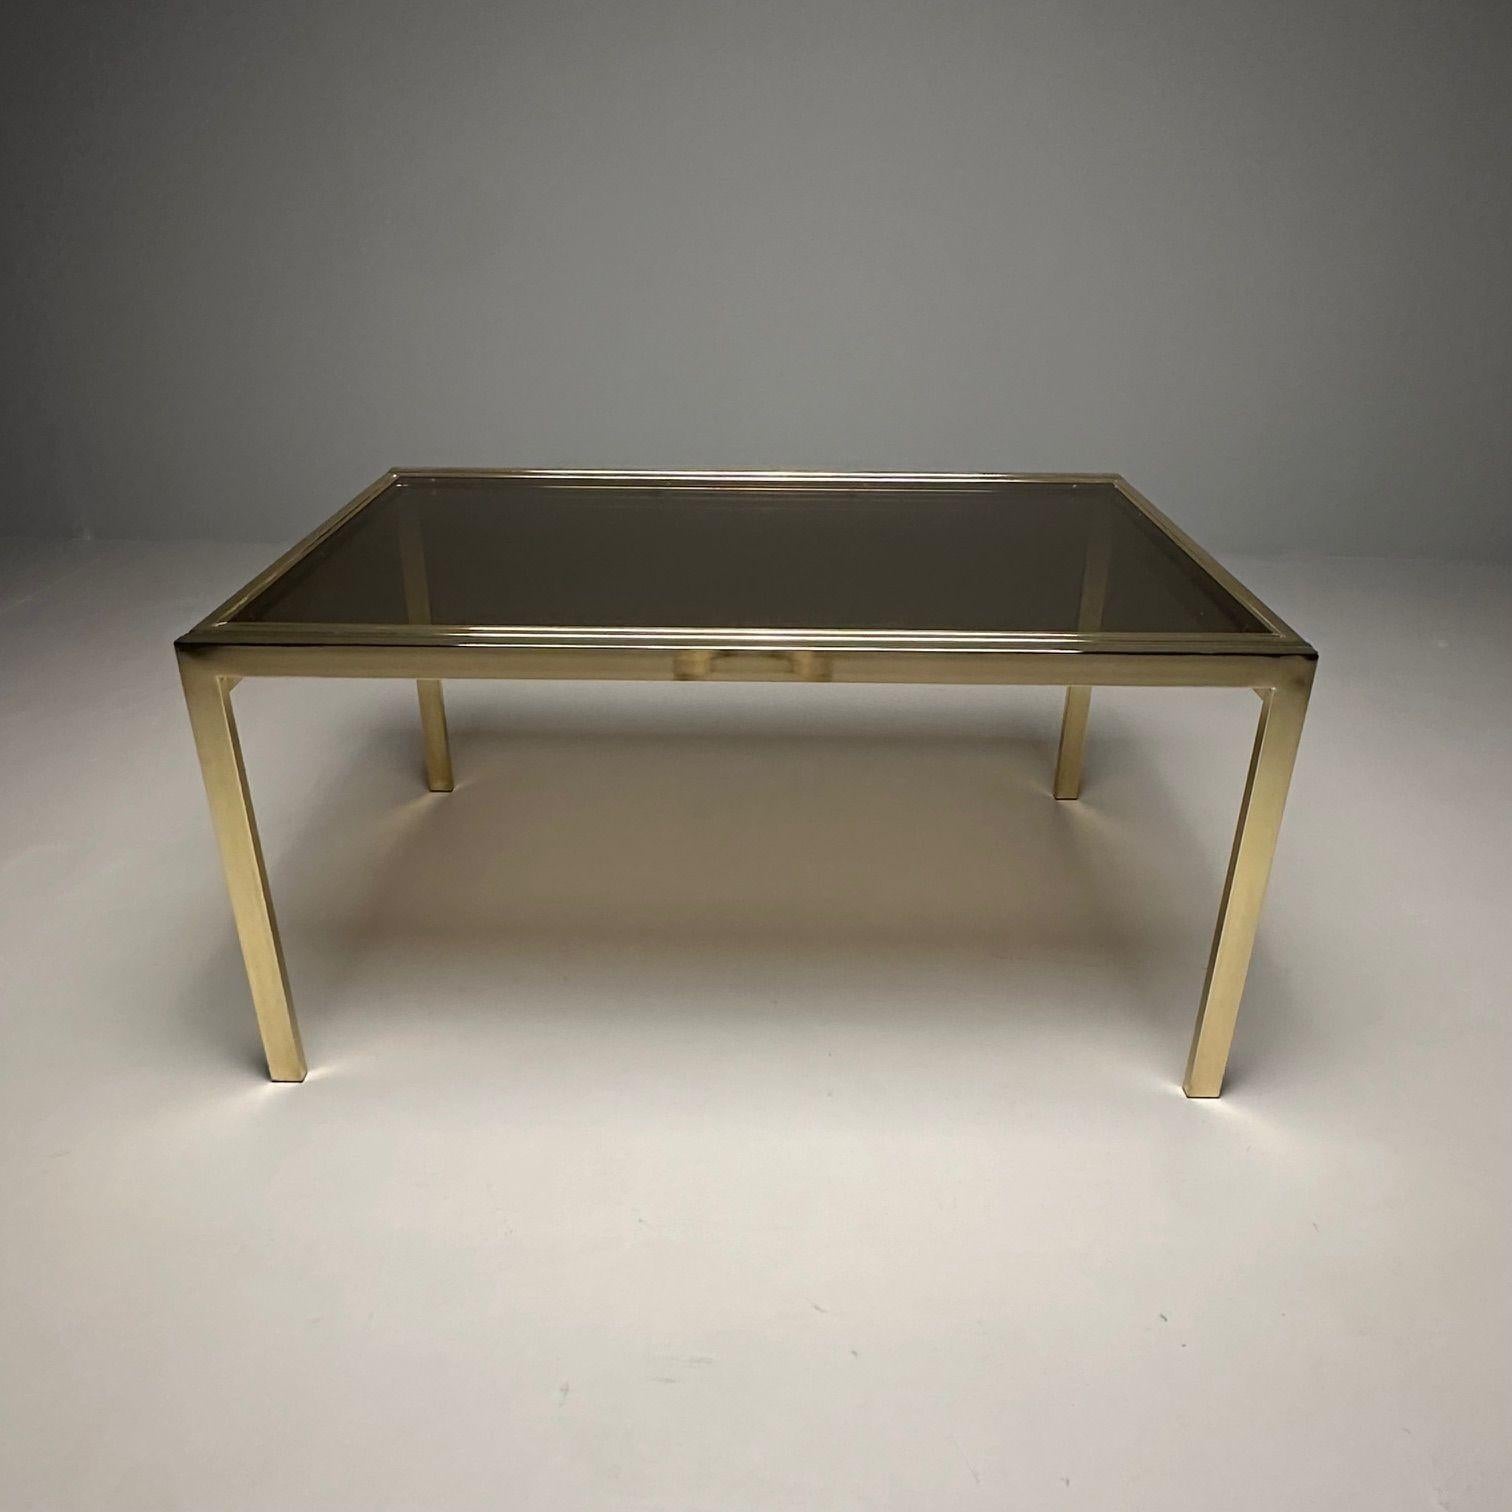 Milo Baughman, DIA, Mid-Century Modern Dining Table, Smoked Glass, Brass, Canada In Good Condition For Sale In Stamford, CT